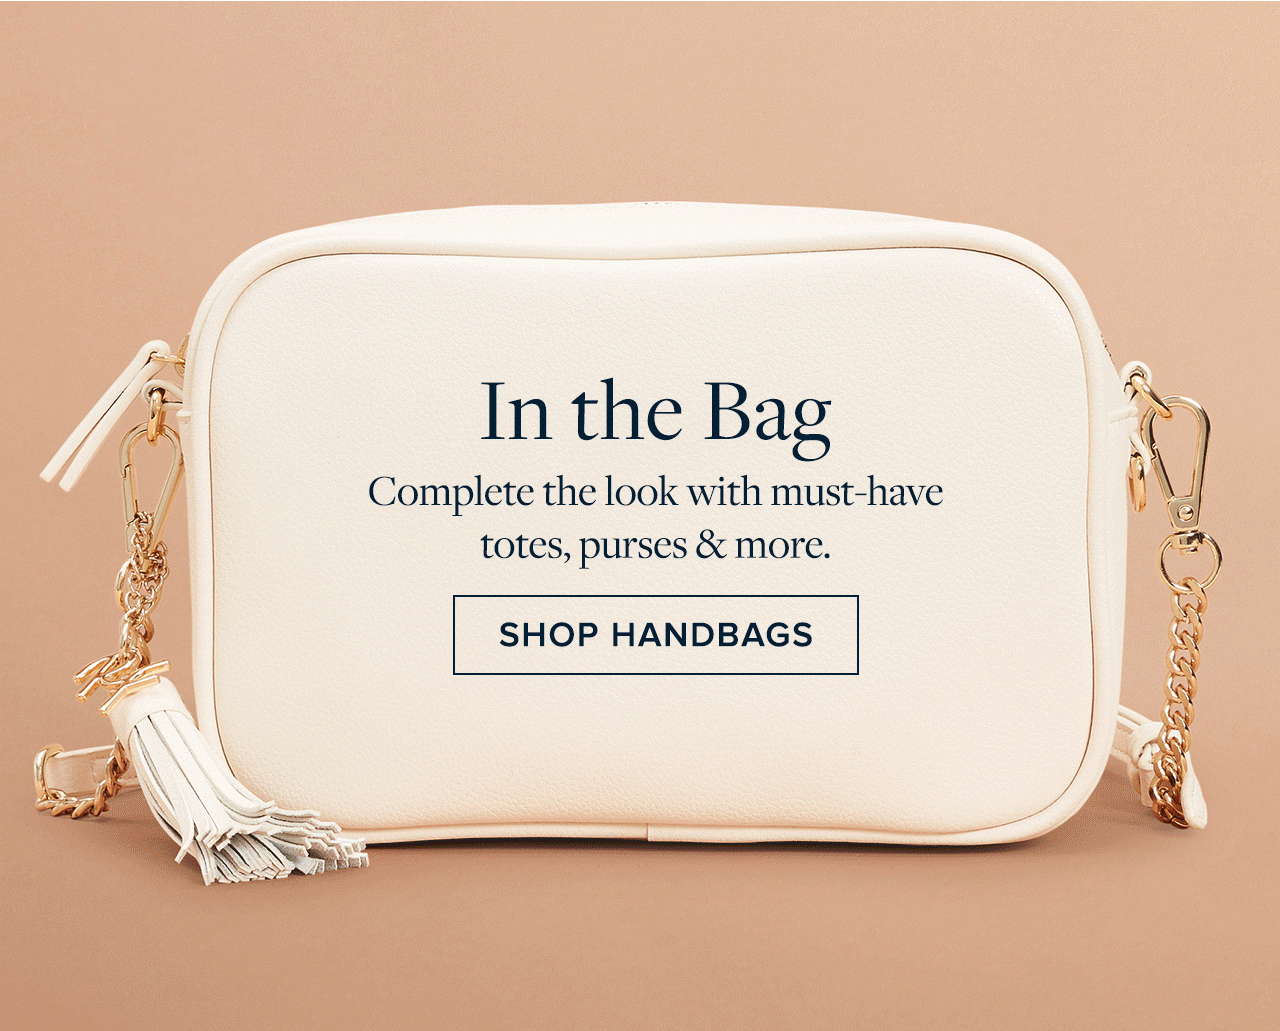 In the Bag Complete the look with must-have totes, purses and more. Shop Handbags